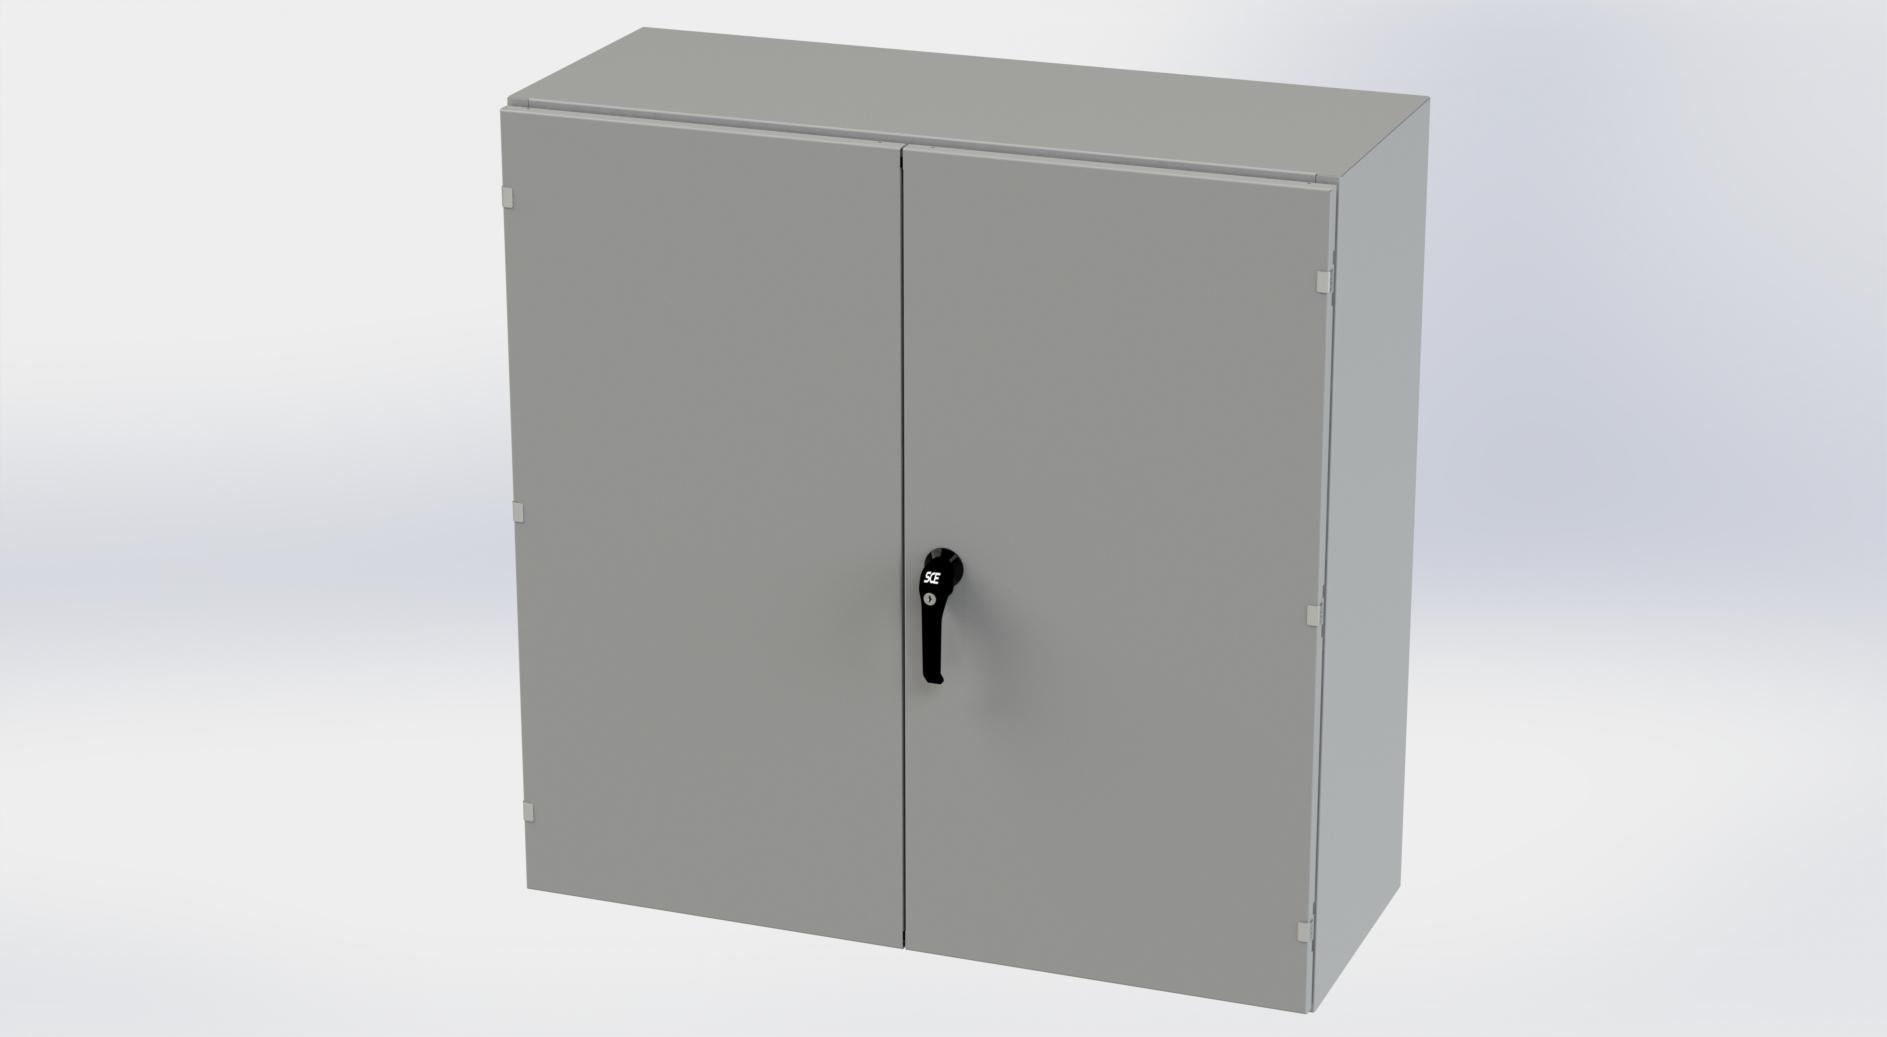 Saginaw Control SCE-424216WFLP WFLP Enclosure, Height:42.00", Width:42.00", Depth:16.00", ANSI-61 gray powder coating inside and out.